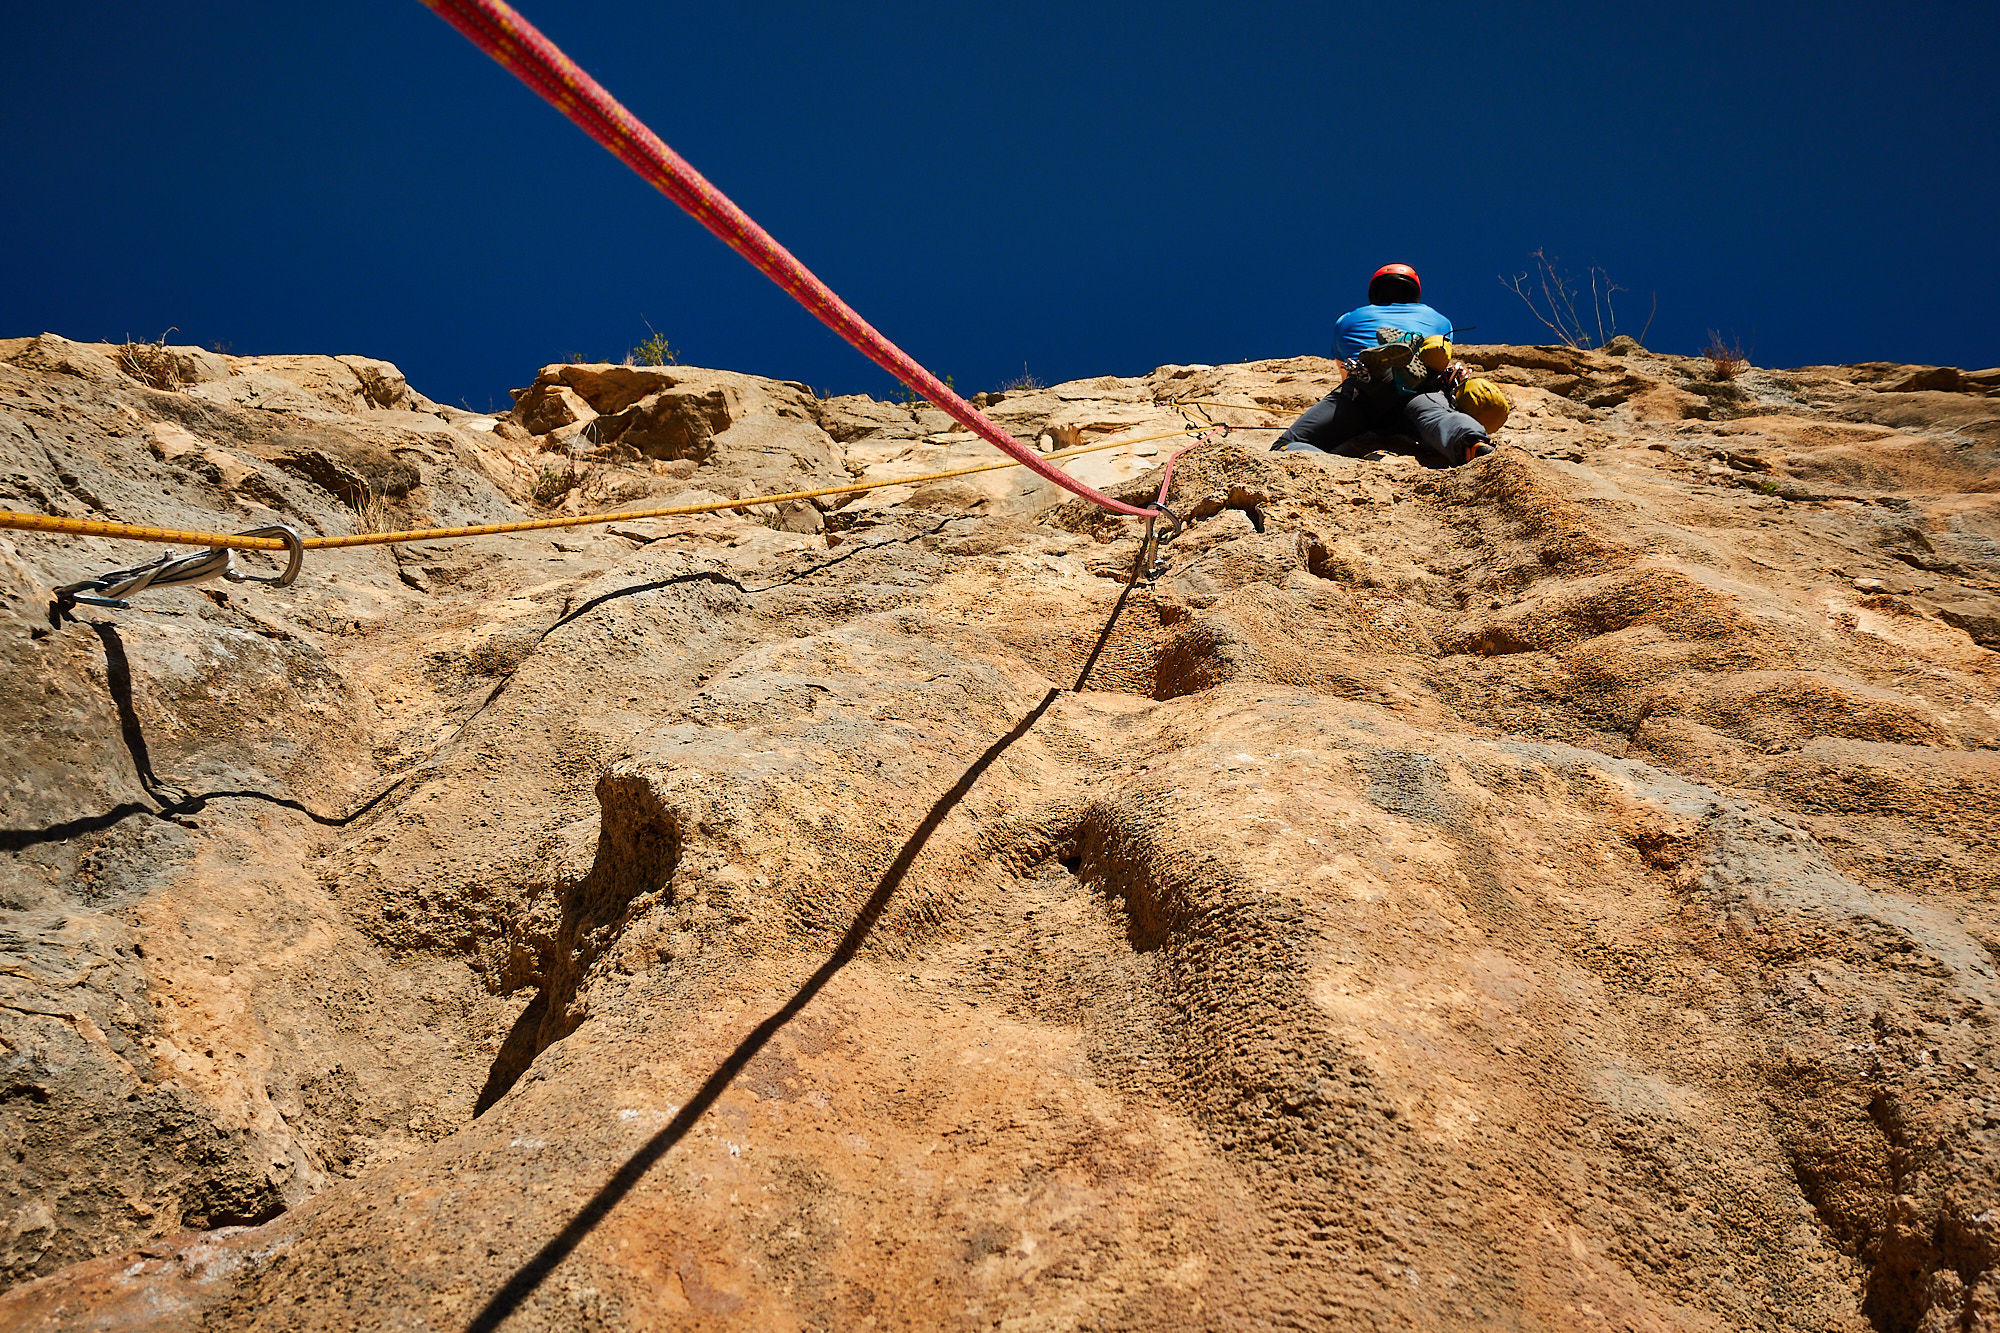 A climber sport climbing on the third pitch of a route called Amptrax on a limestone cliff in southern Spain with blue sky above